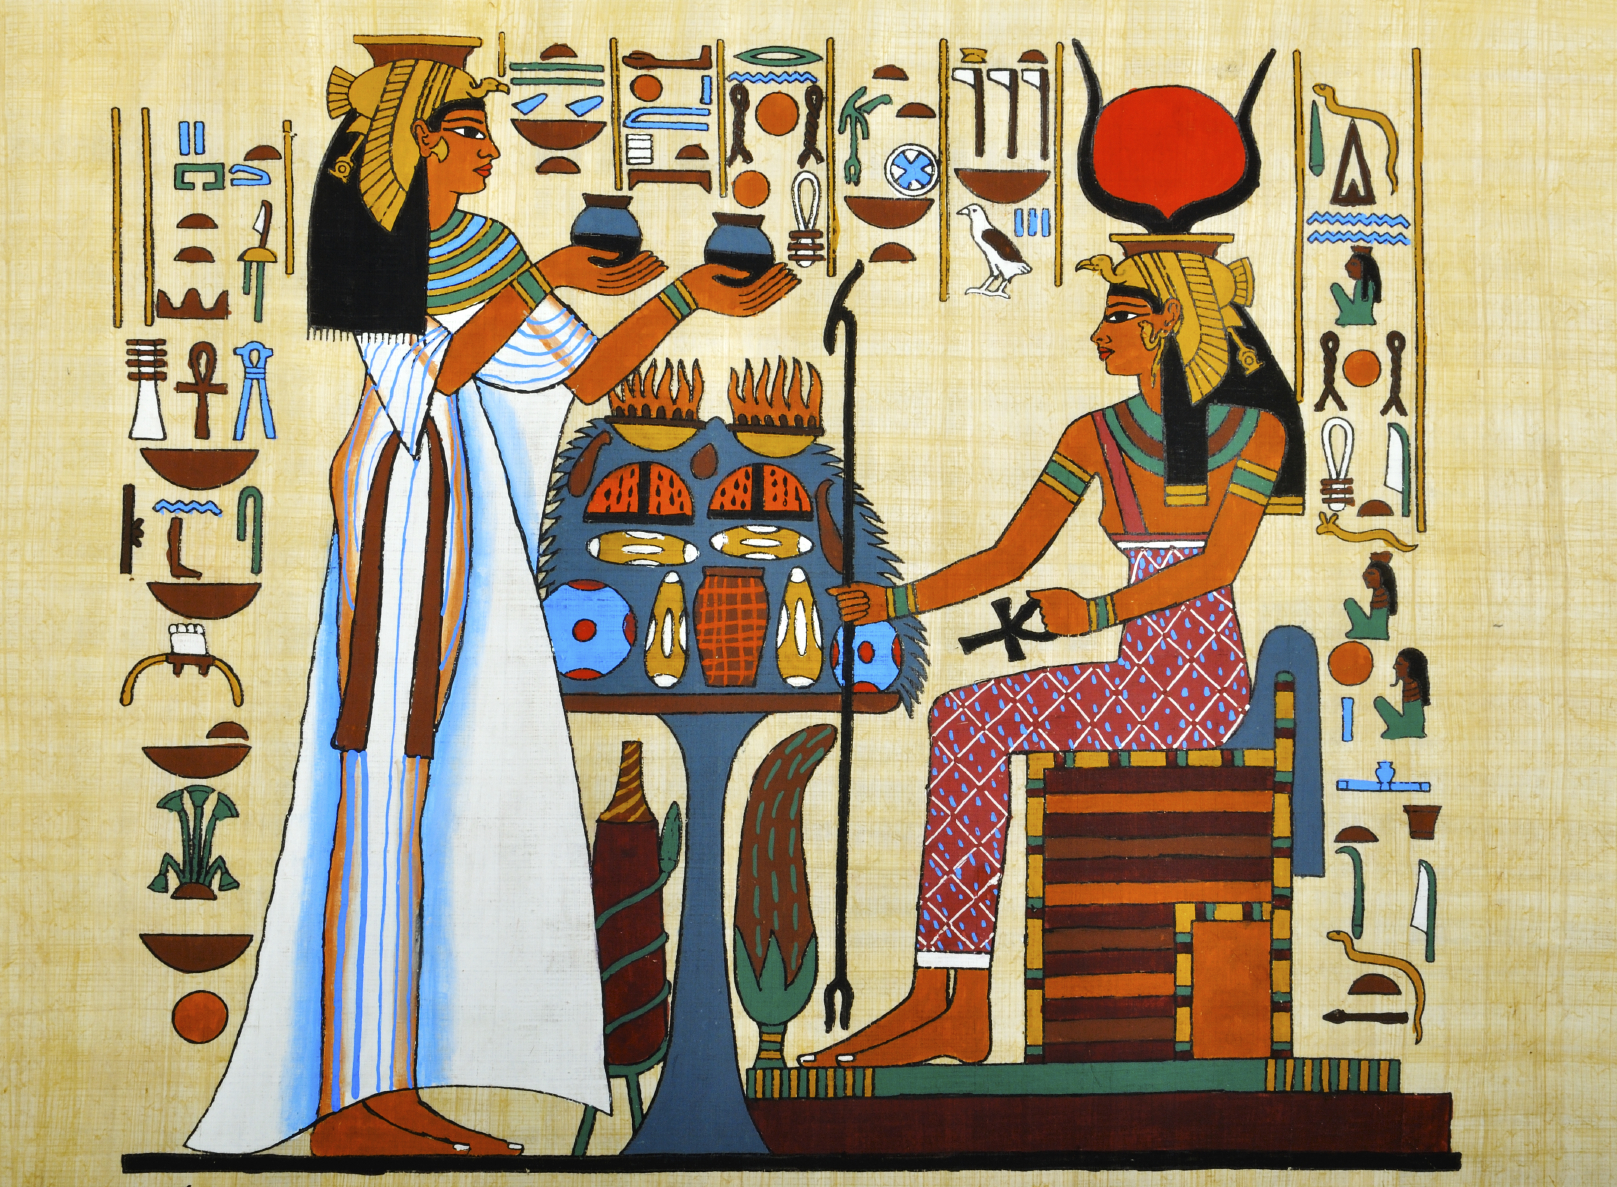 Essential oils uses in ancient Egypt